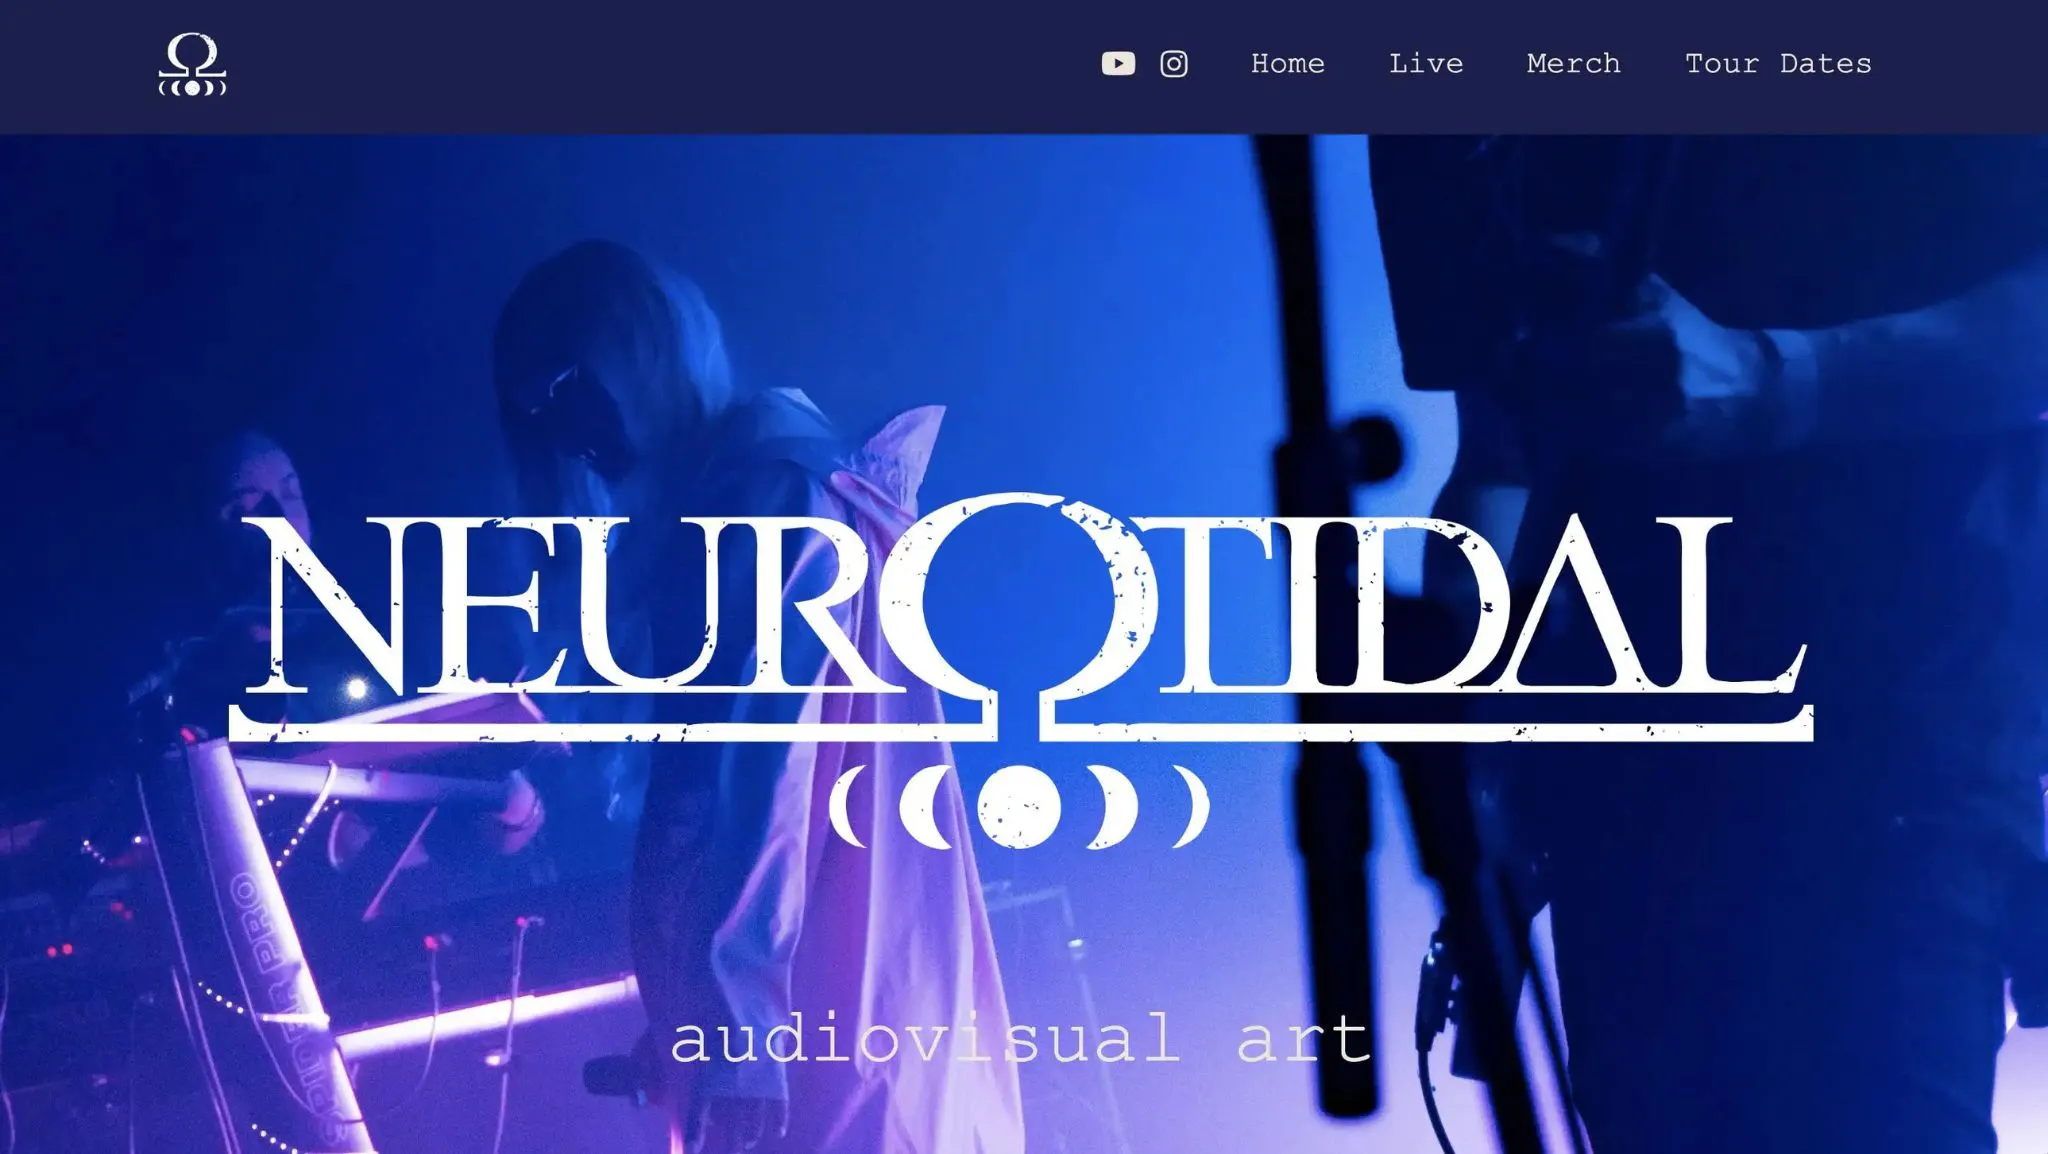 Website created for Metal Band Neurotidal